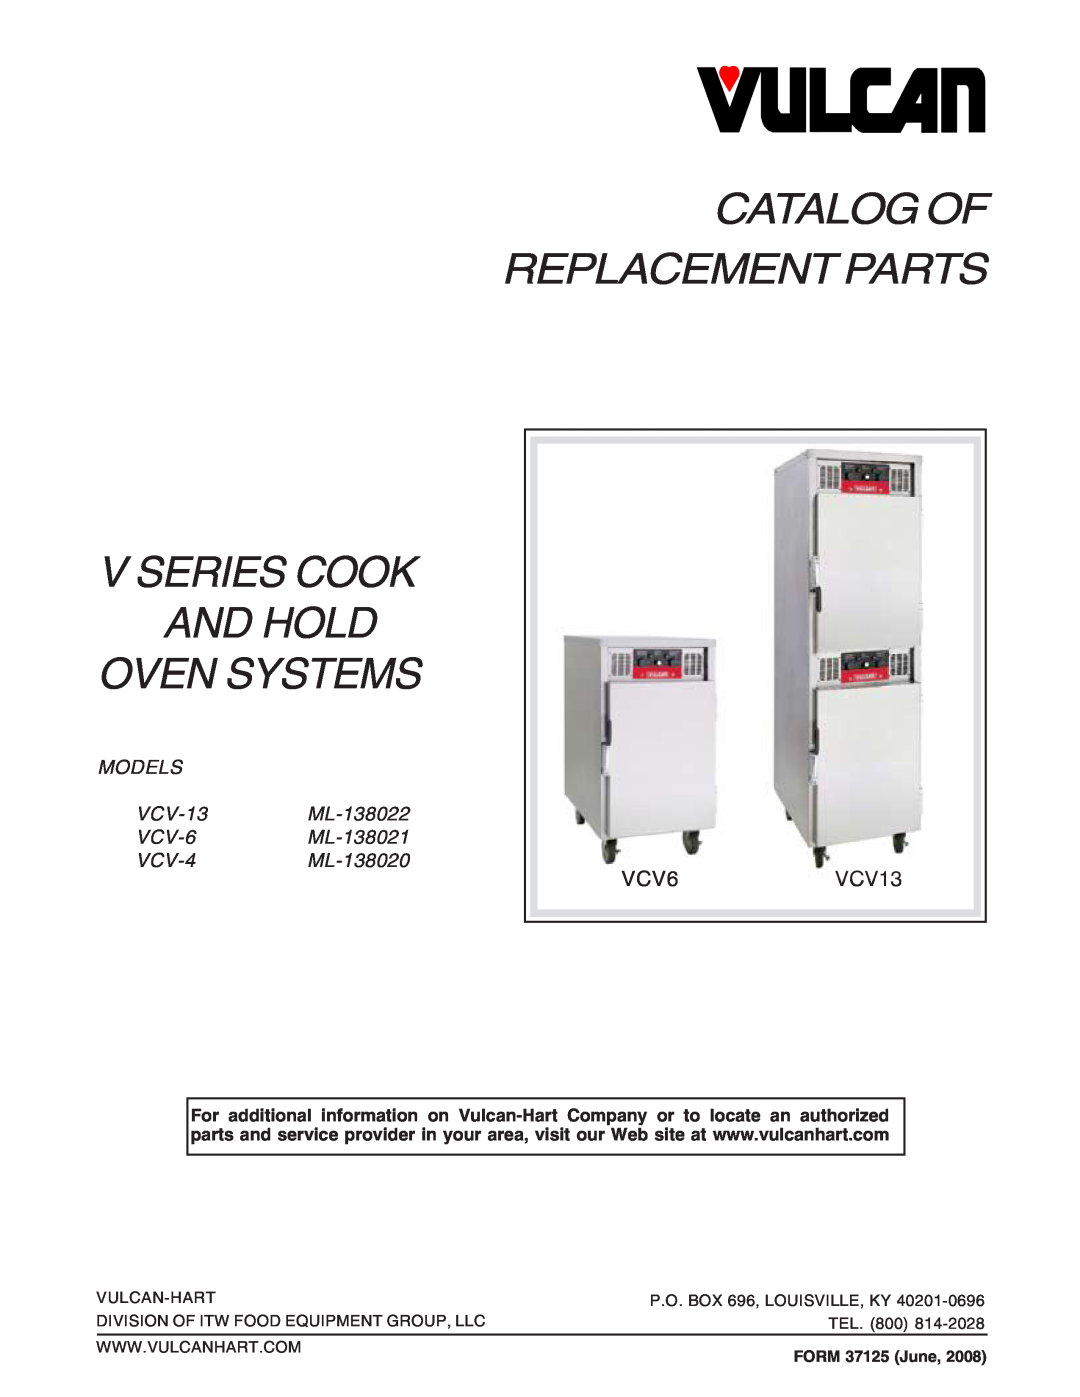 Vulcan-Hart manual Catalog Of Replacement Parts V Series Cook, And Hold Oven Systems, VCV6VCV13, VCV-4ML-138020, Tel 